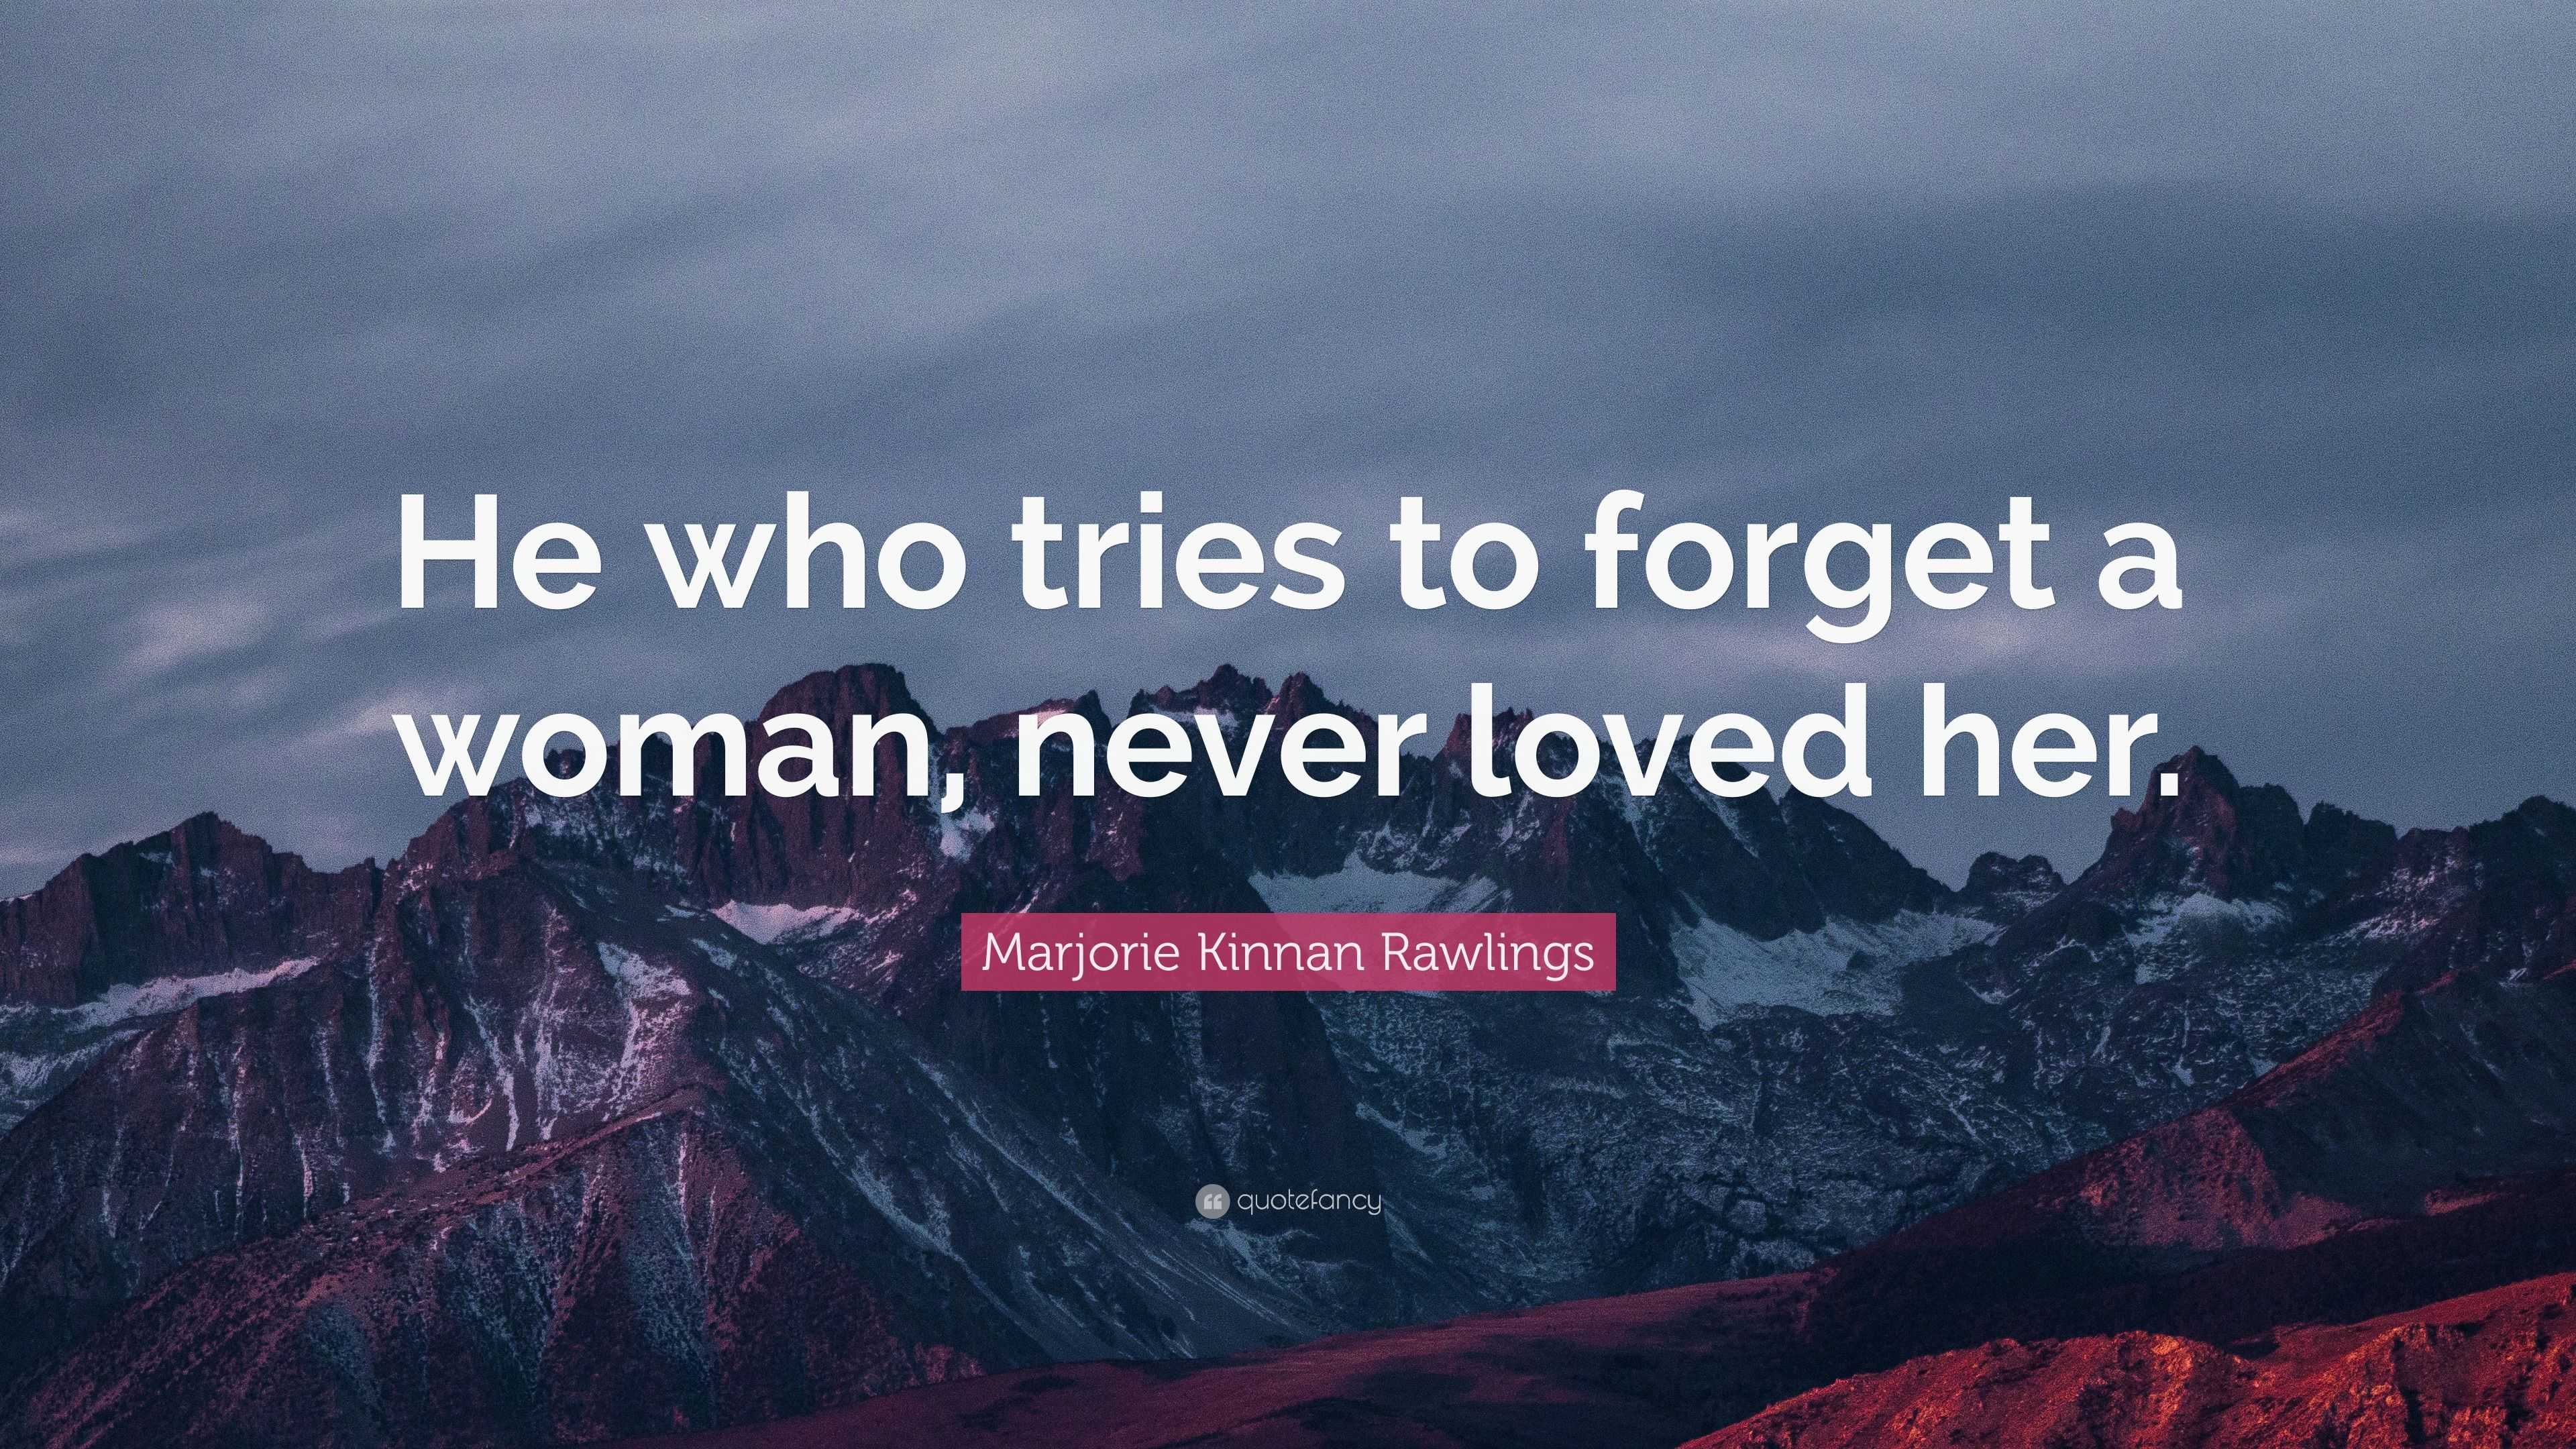 Marjorie Kinnan Rawlings Quote: “He who tries to forget a woman, never ...